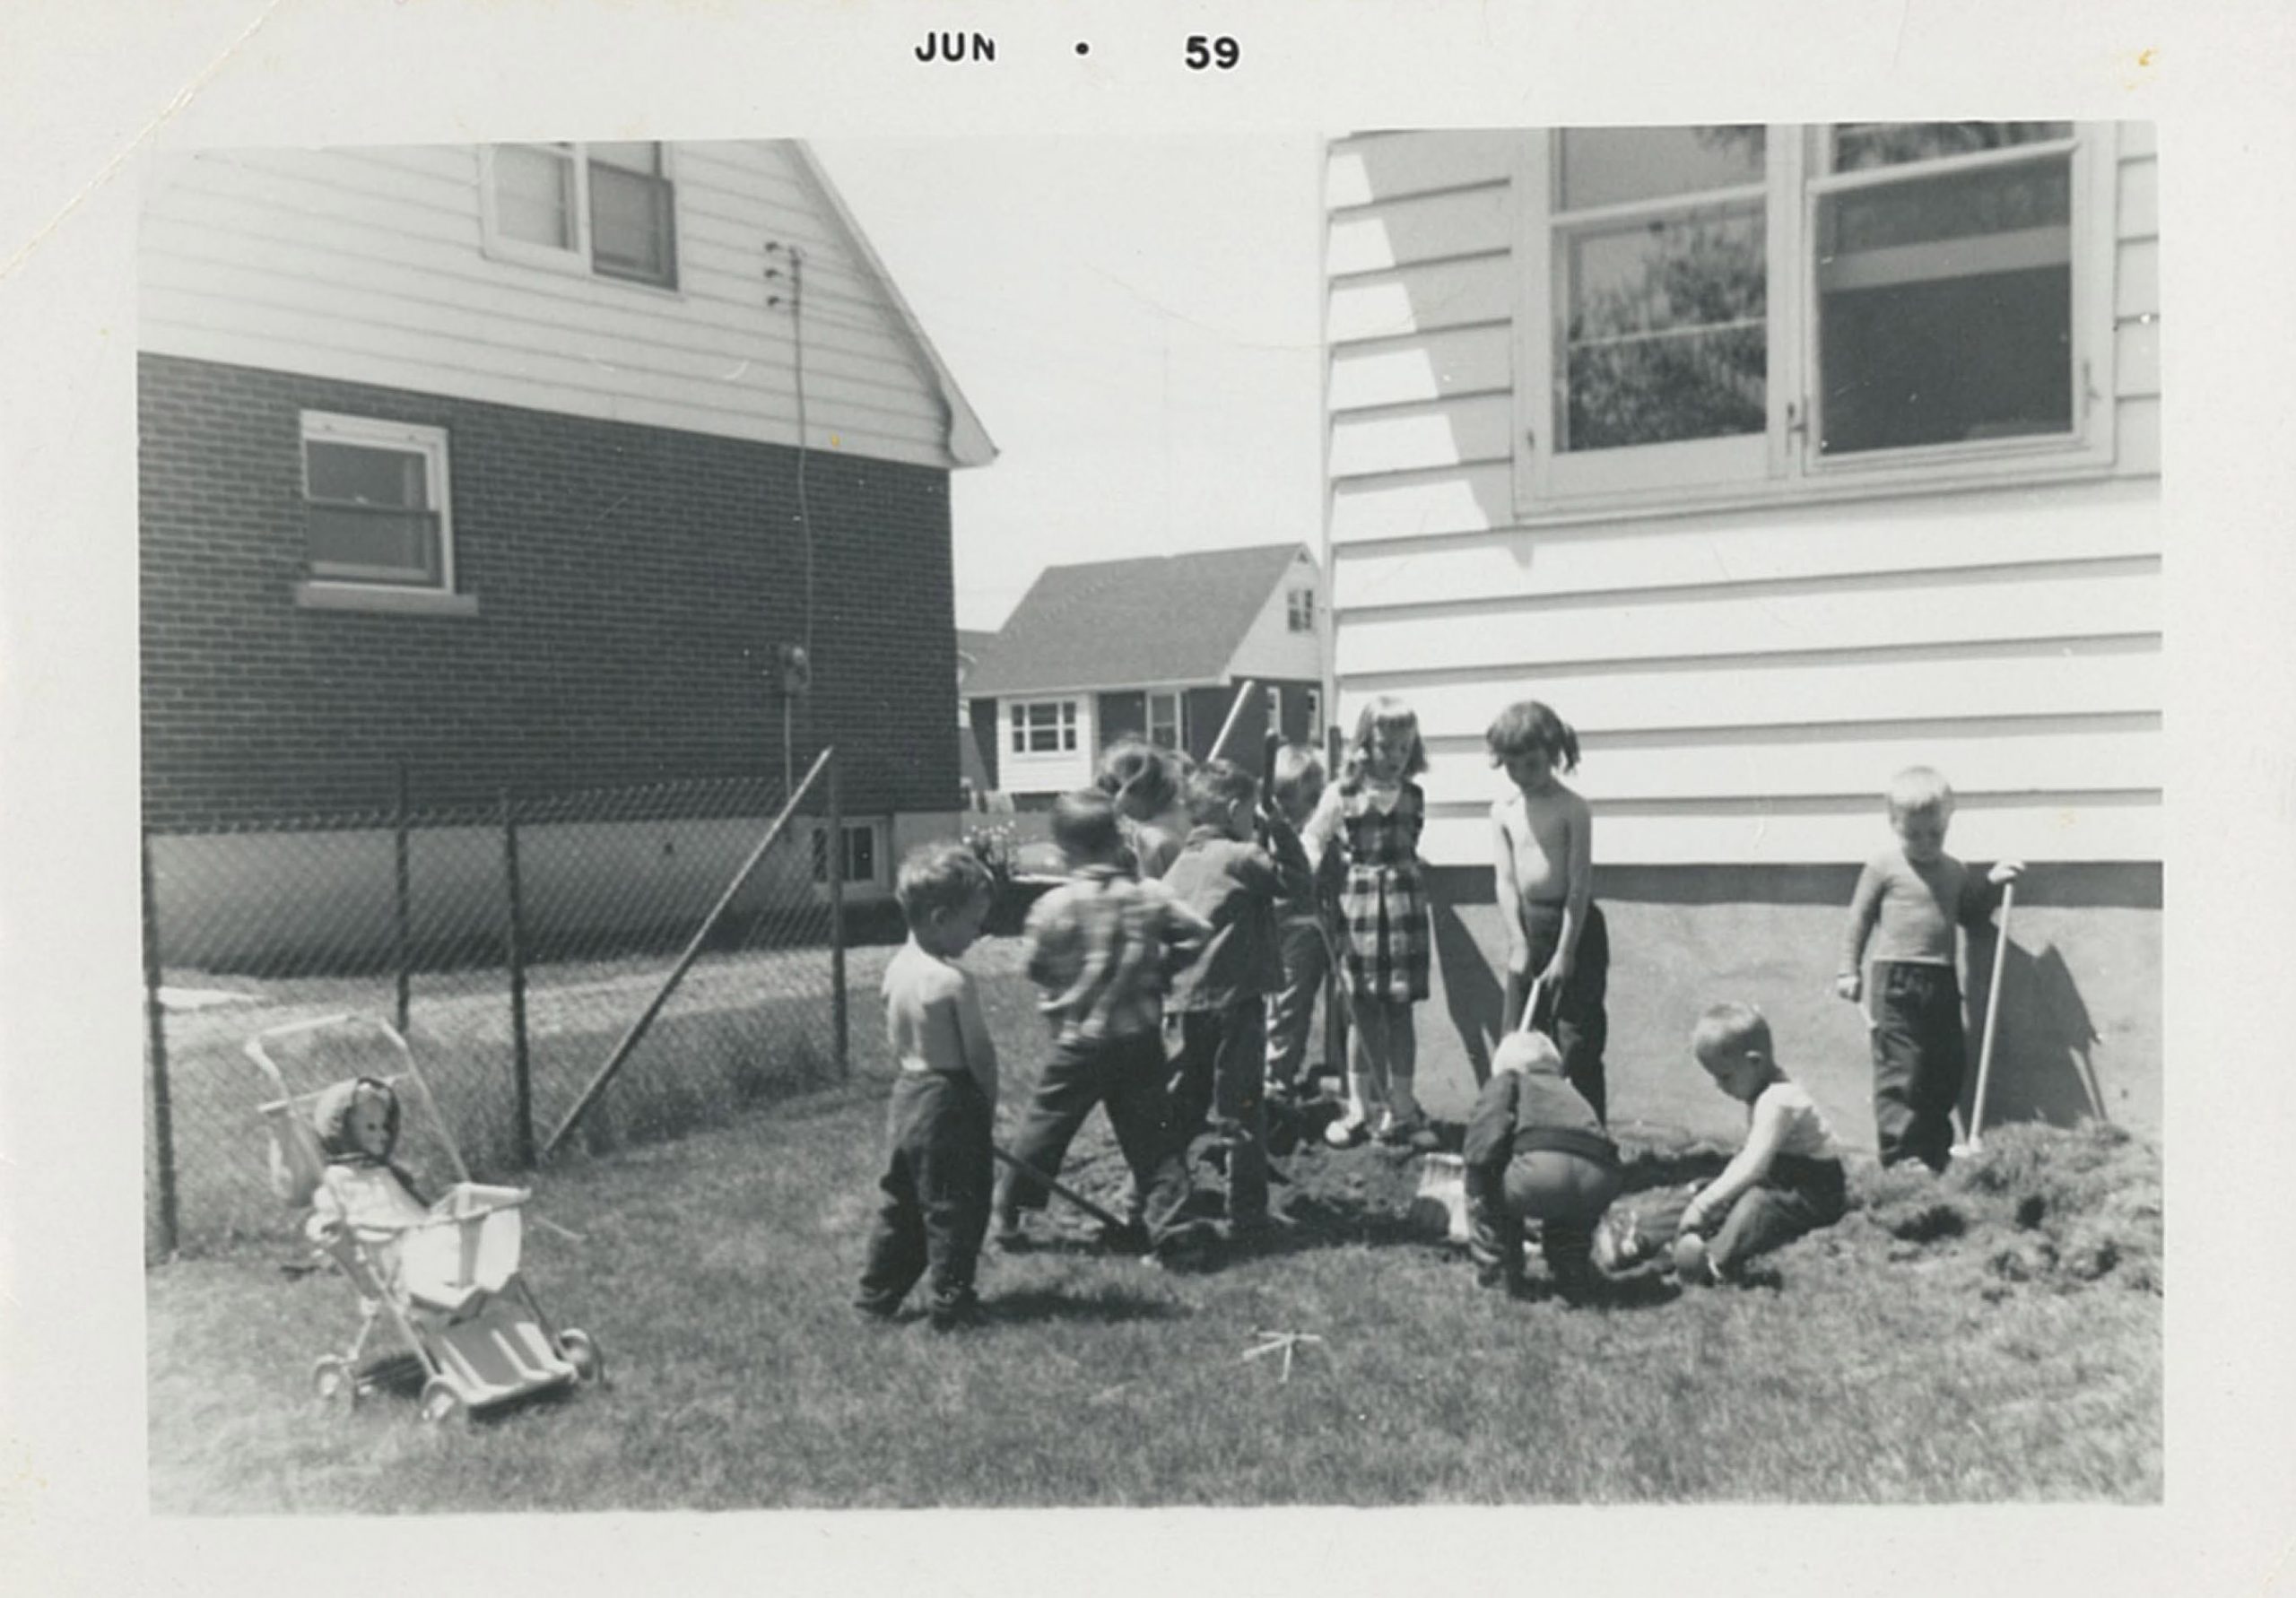 A black and white photograph of a group of children in a backyard. On the top there is typed "JUN 59"